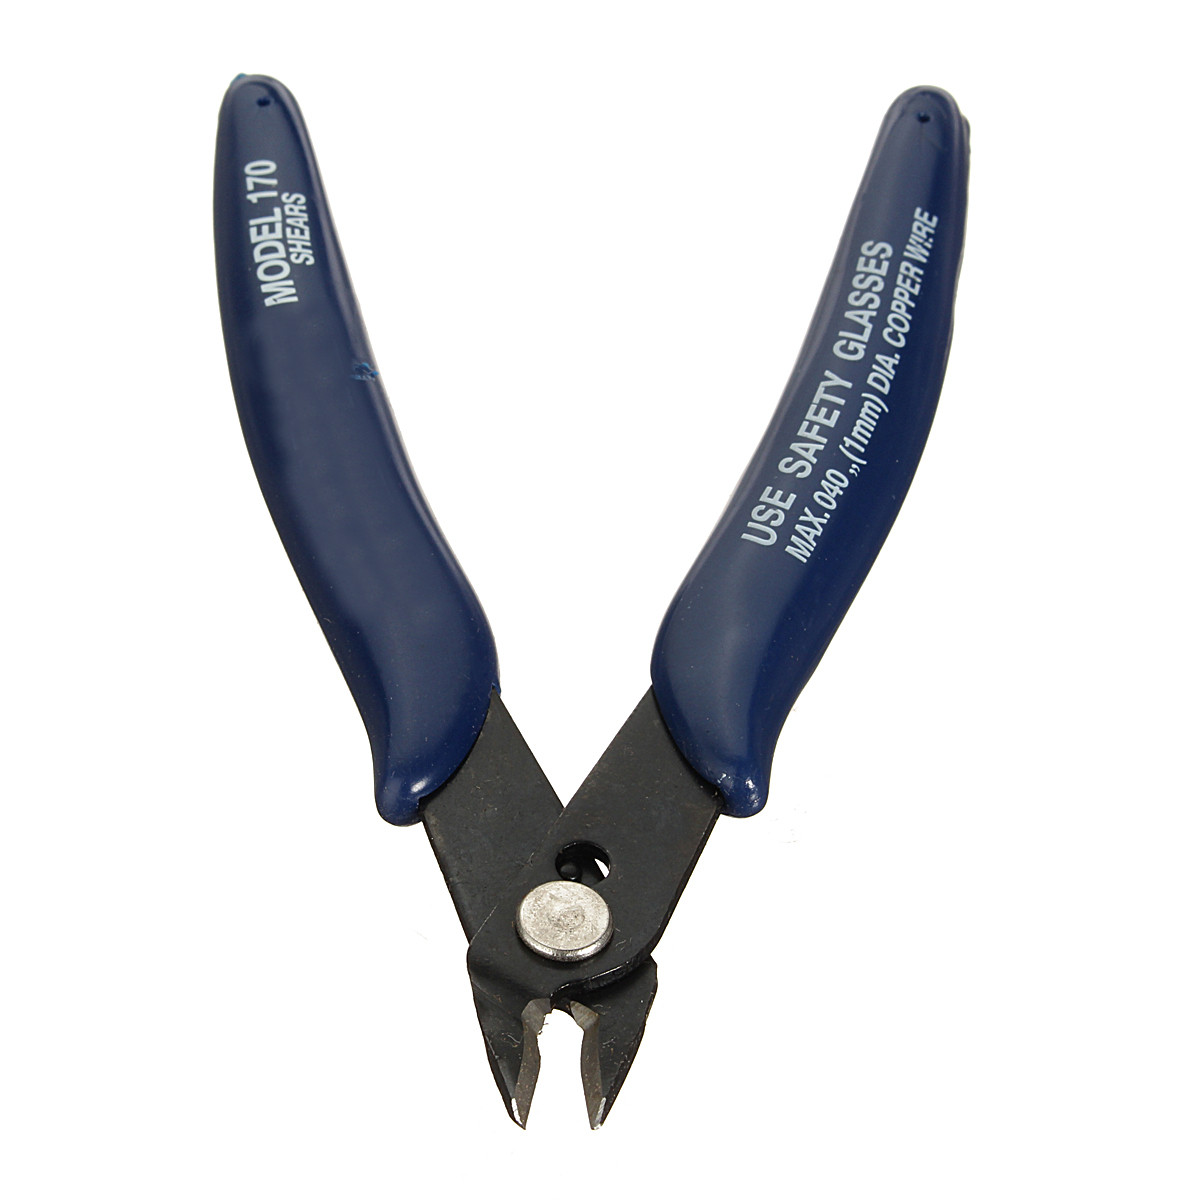 5PCS-DANIU-Electrical-Cutting-Plier-Wire-Cable-Cutter-Side-Snips-Flush-Pliers-Tool-1387787